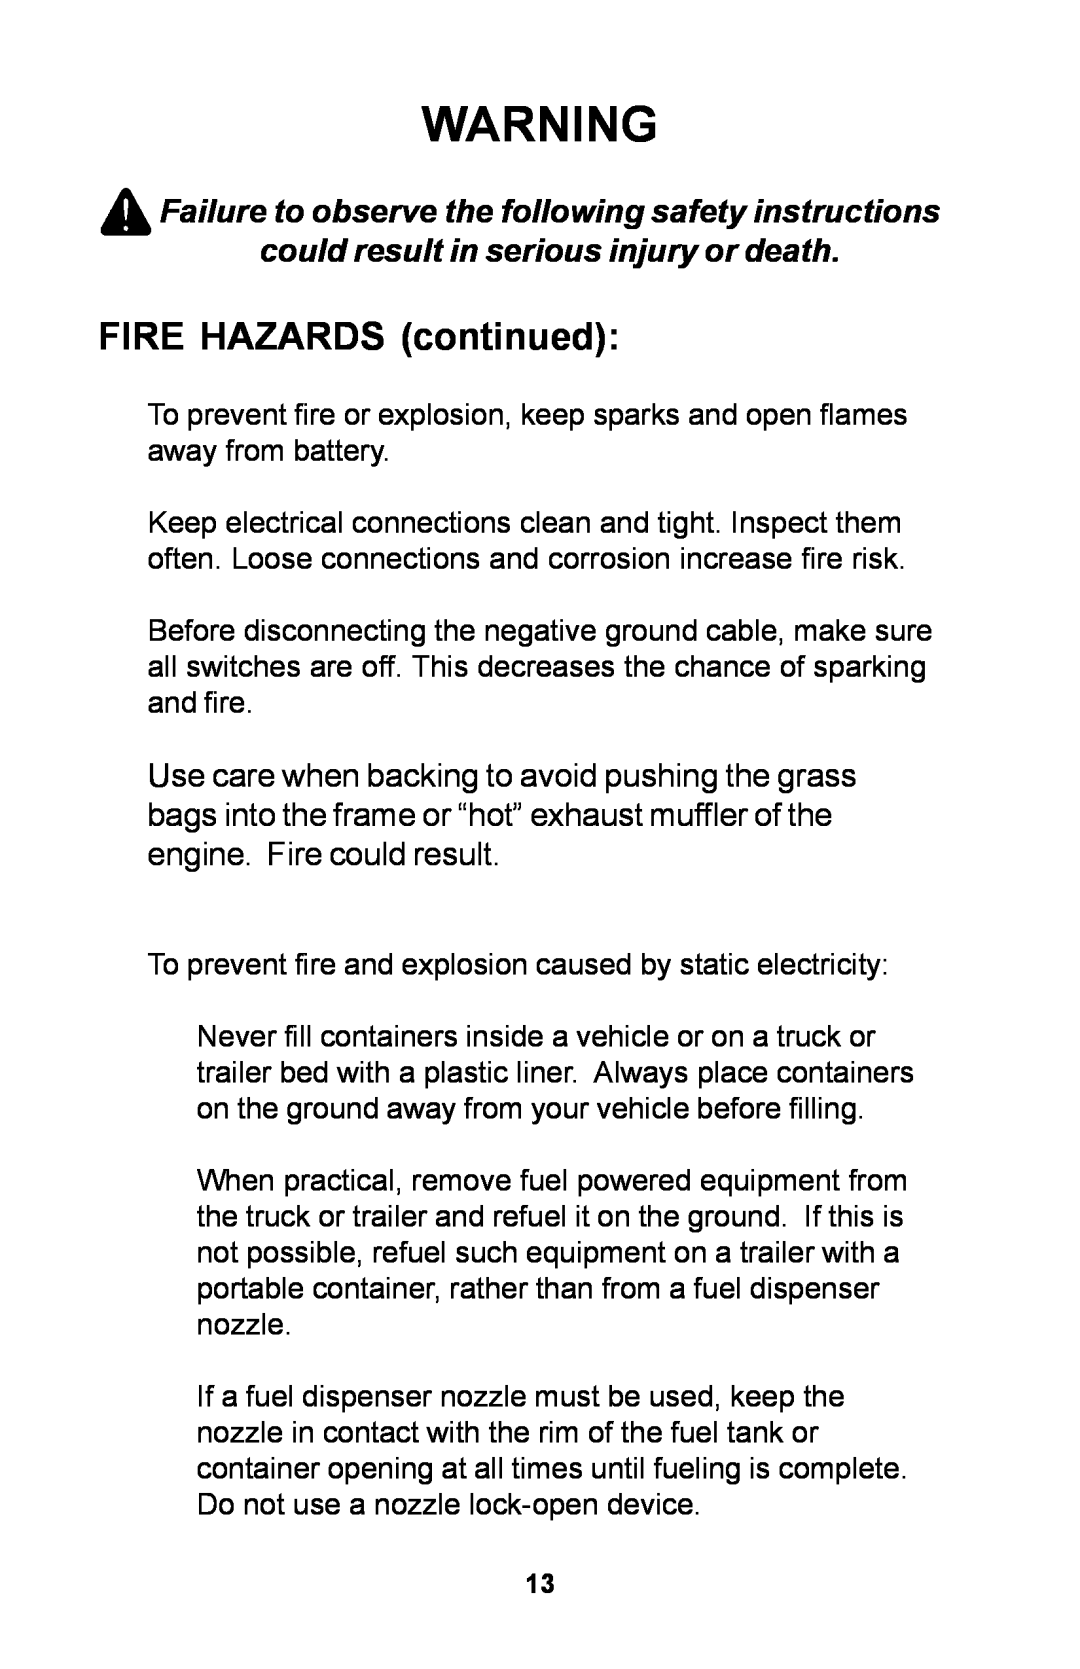 Dixon 30 manual FIRE HAZARDS continued, could result in serious injury or death 